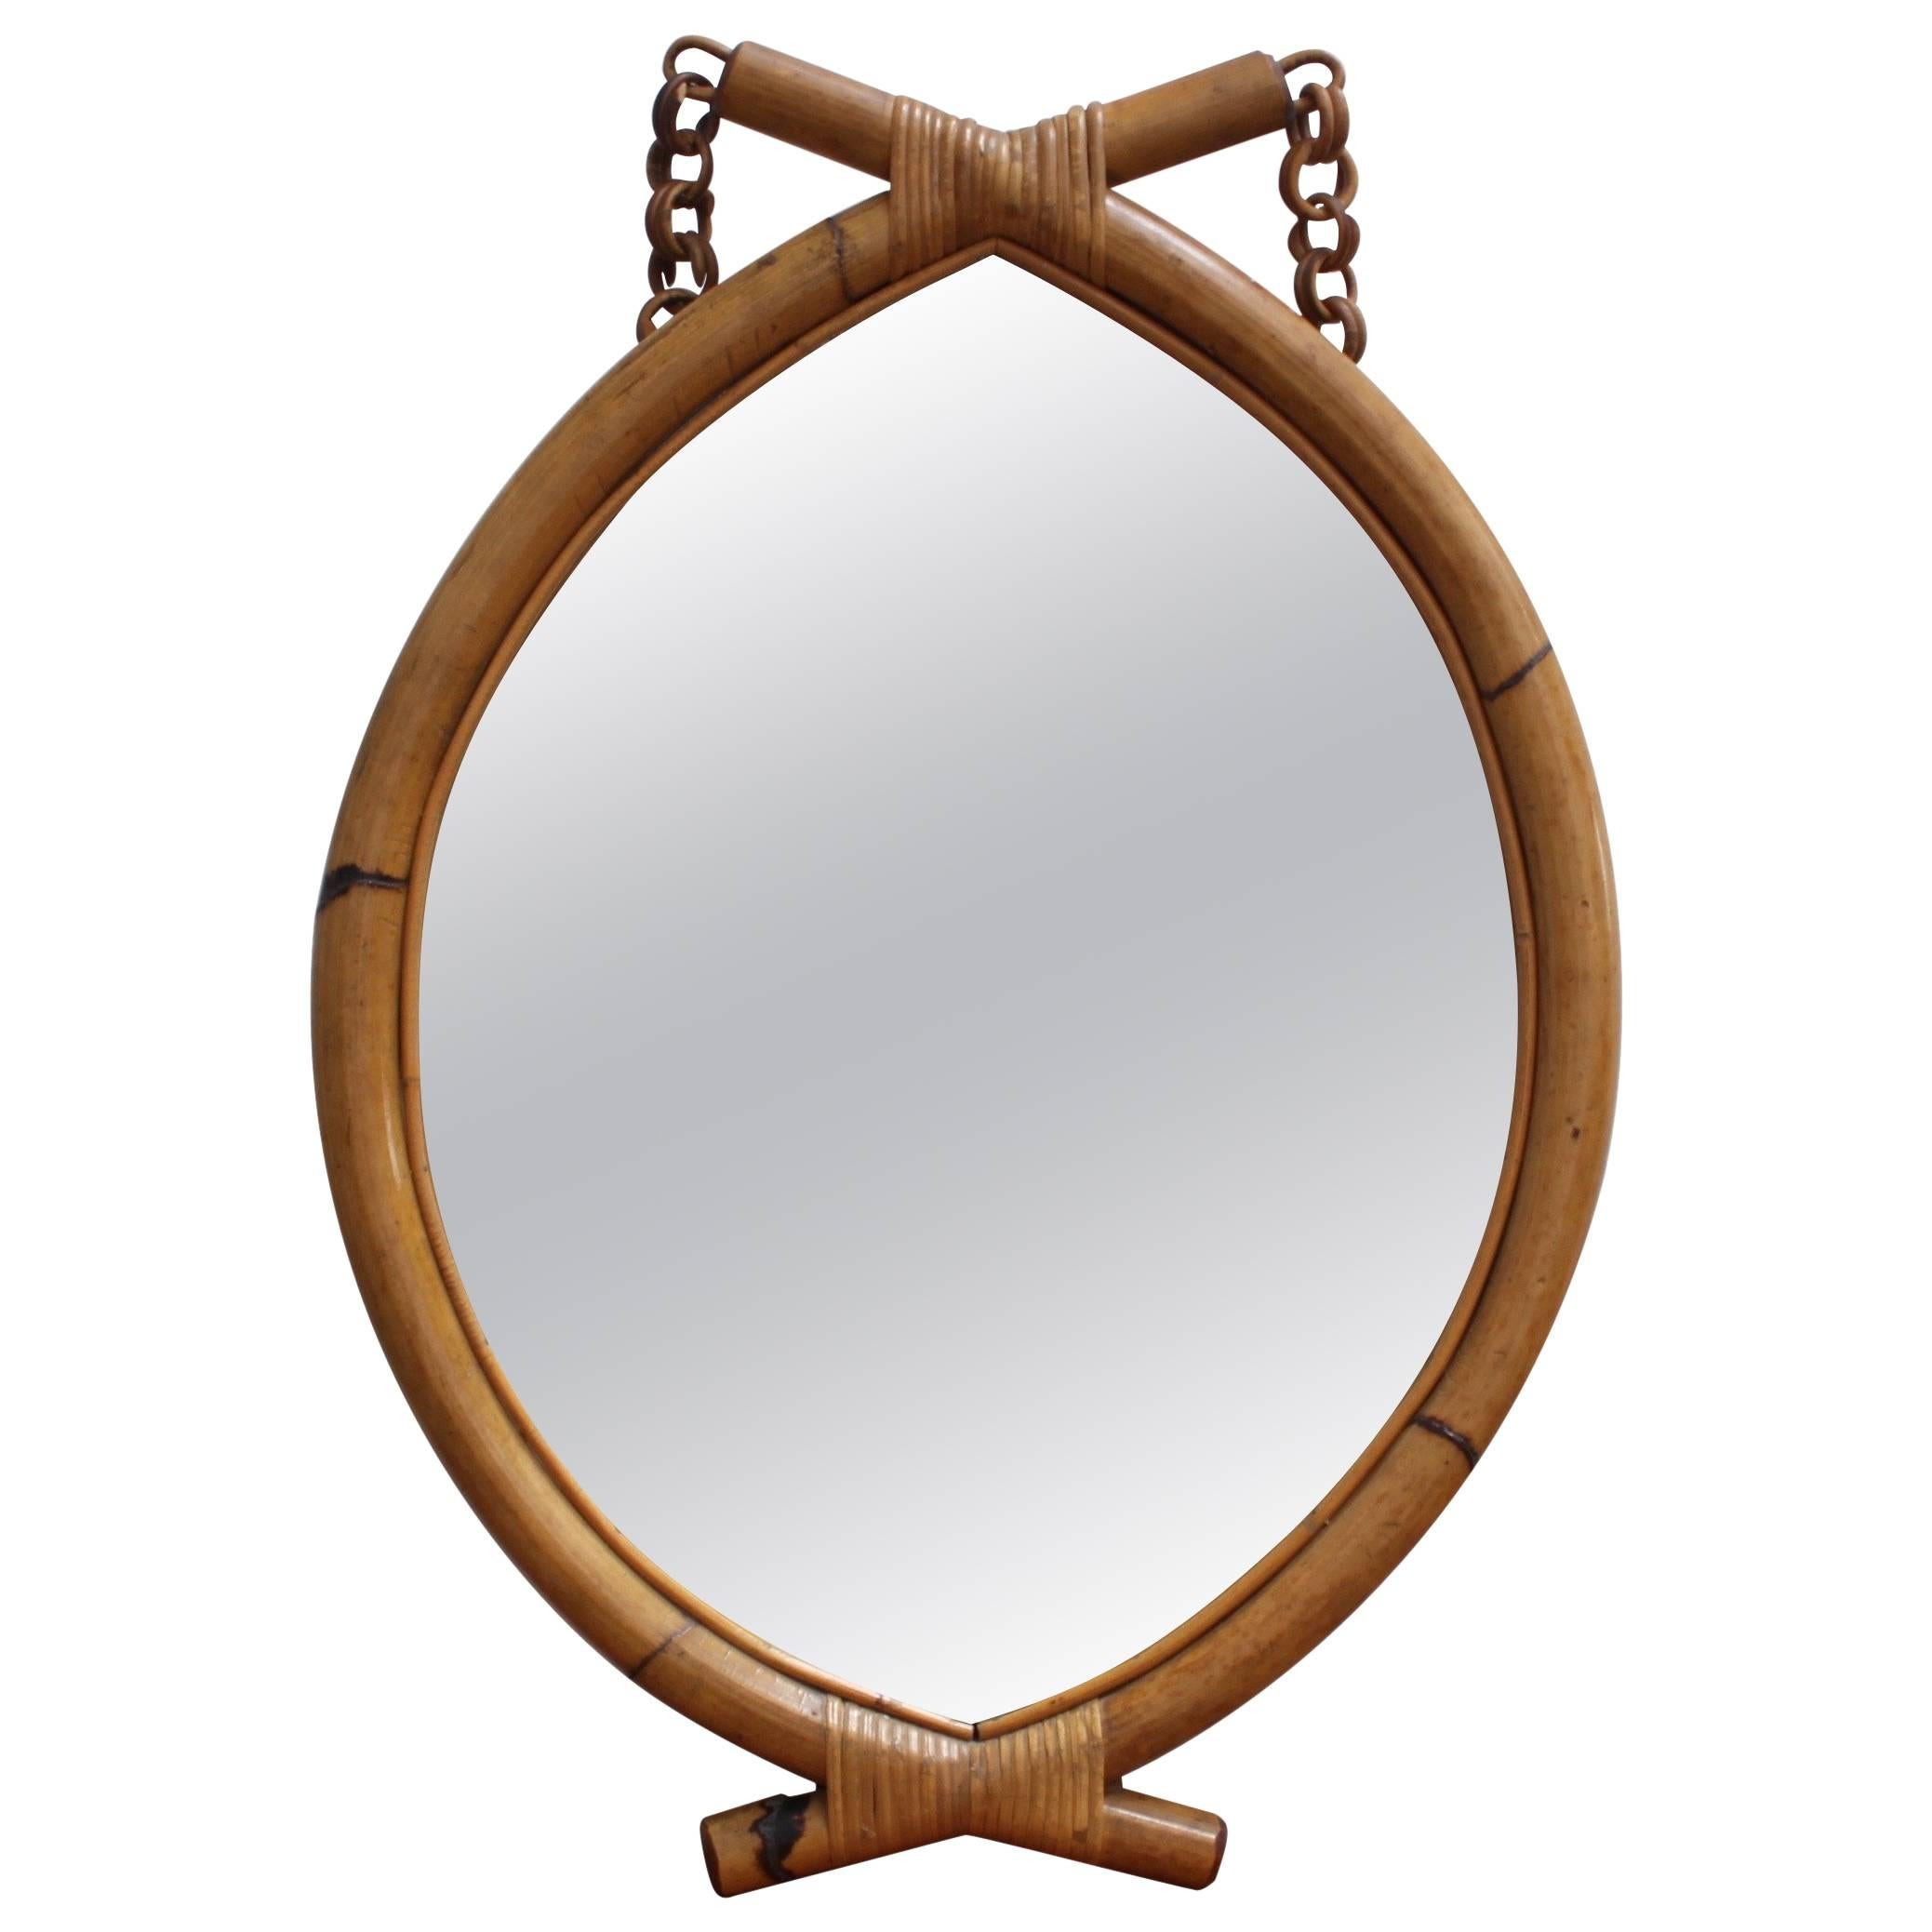 Italian 'Eye-Shaped' Style Bamboo and Rattan Mirror with Hanging Chain